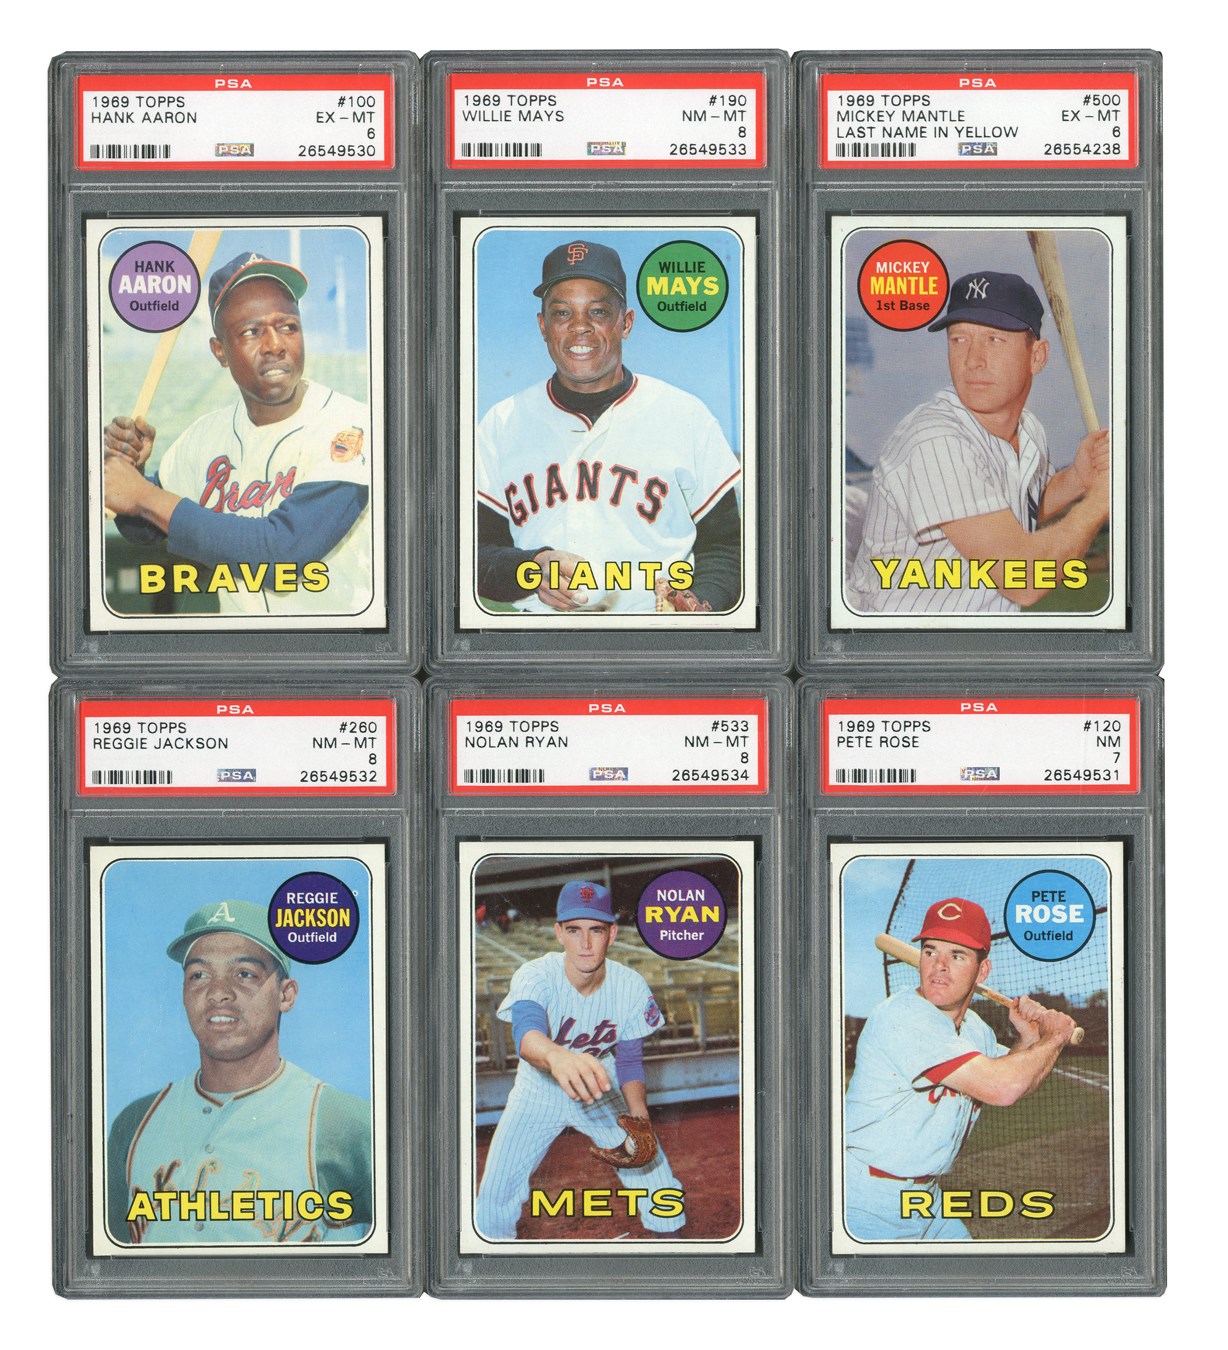 Baseball and Trading Cards - 1969 Topps High Grade Complete Set (664) with SIX PSA Graded